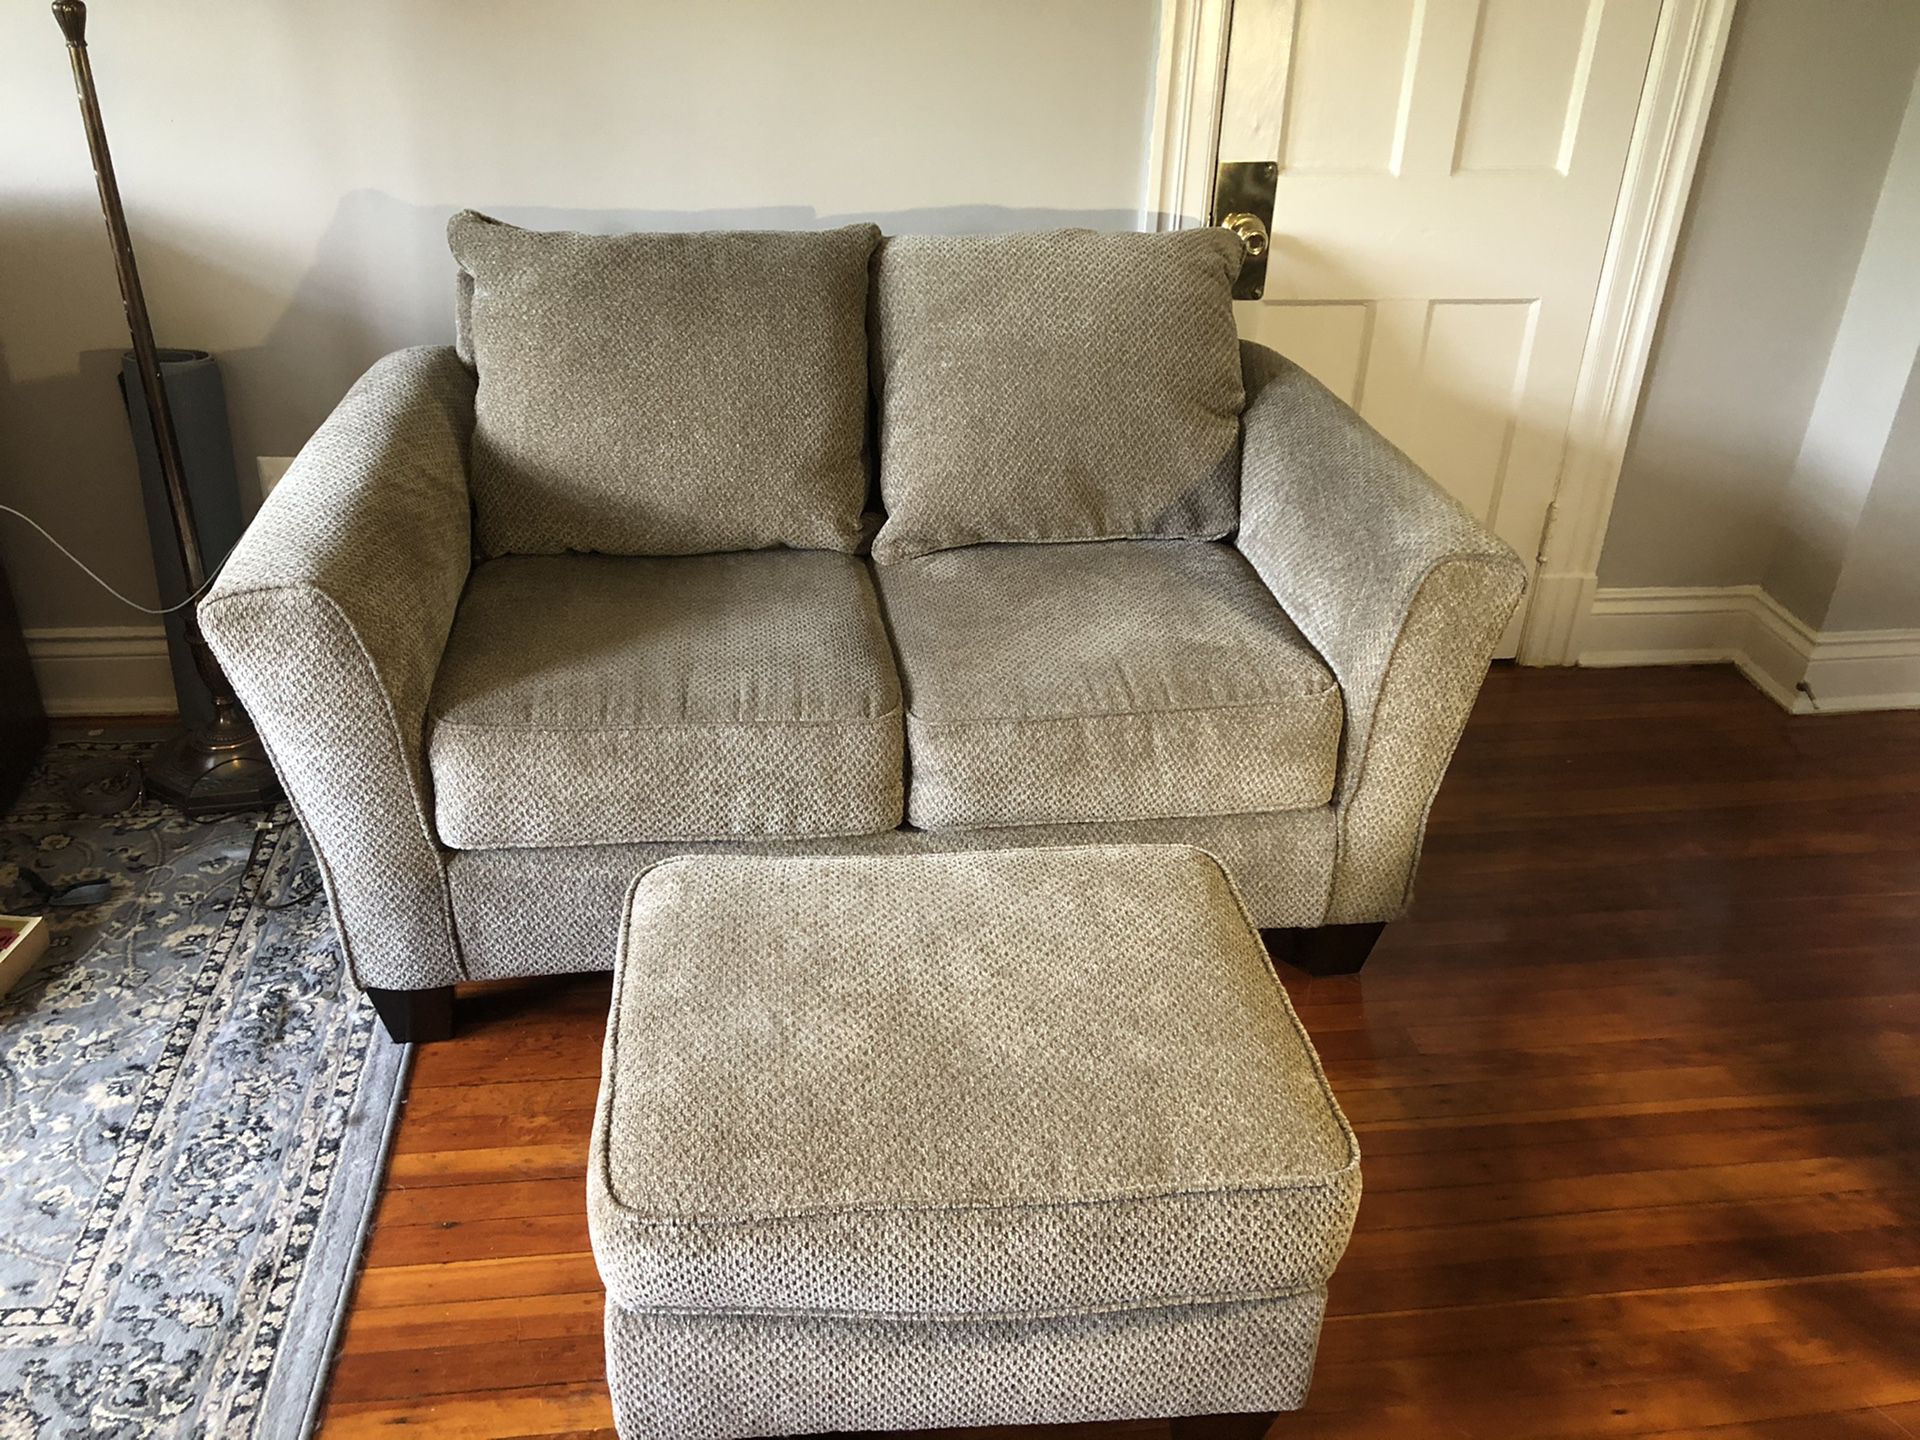 Cozy loveseat and ottoman - like new, sanitized. Best offer accepted!